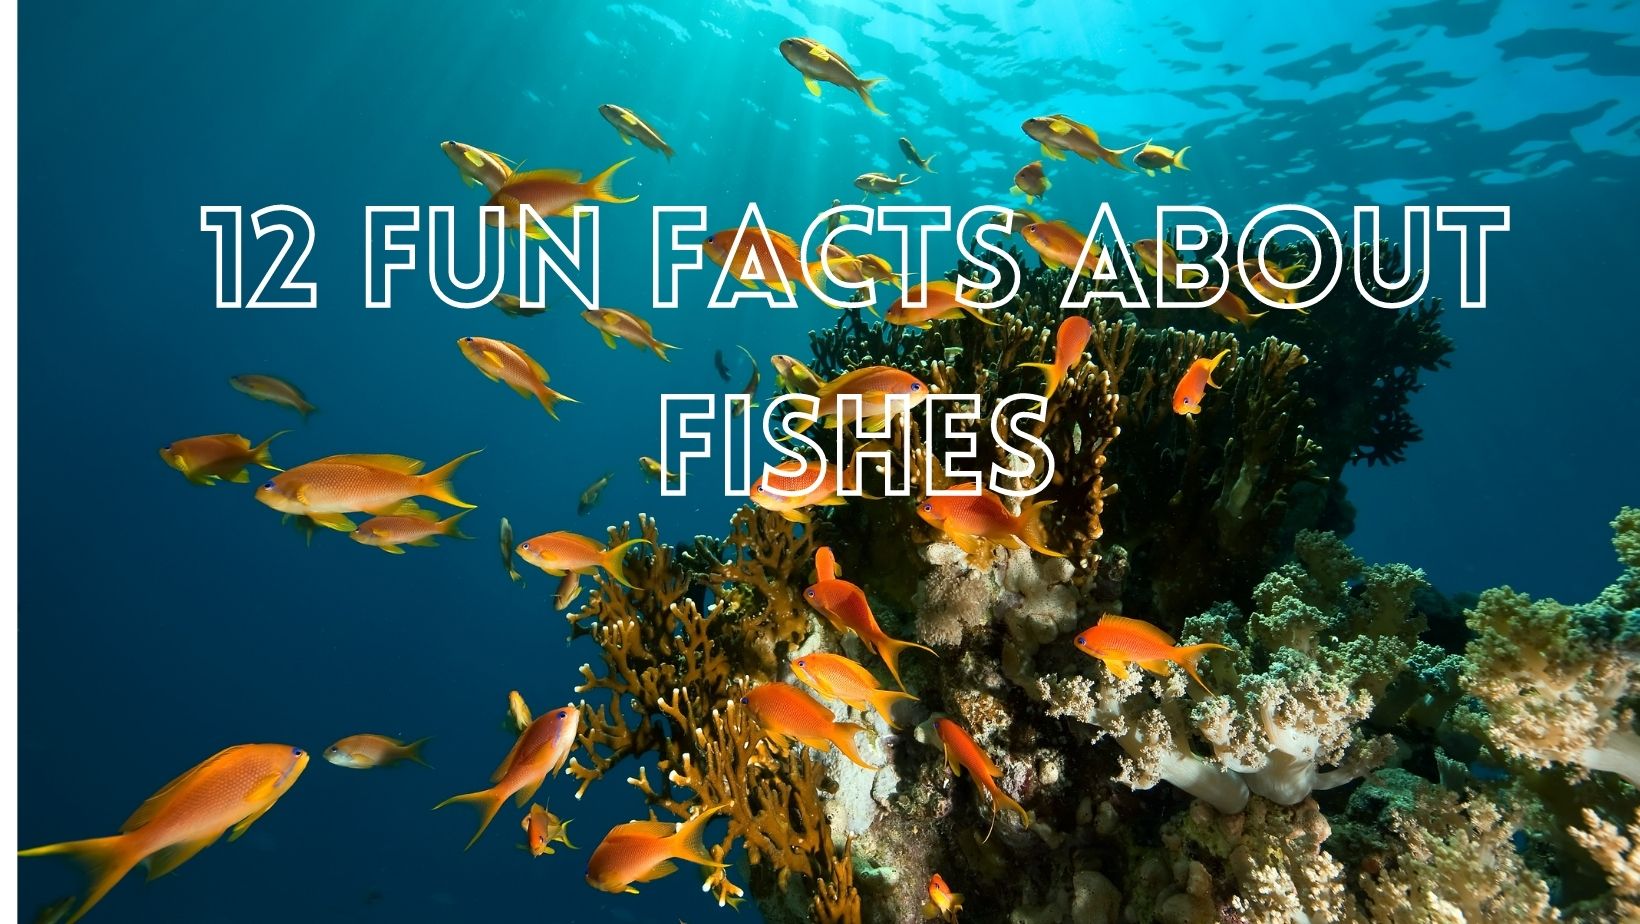 Awesome fun facts about fish